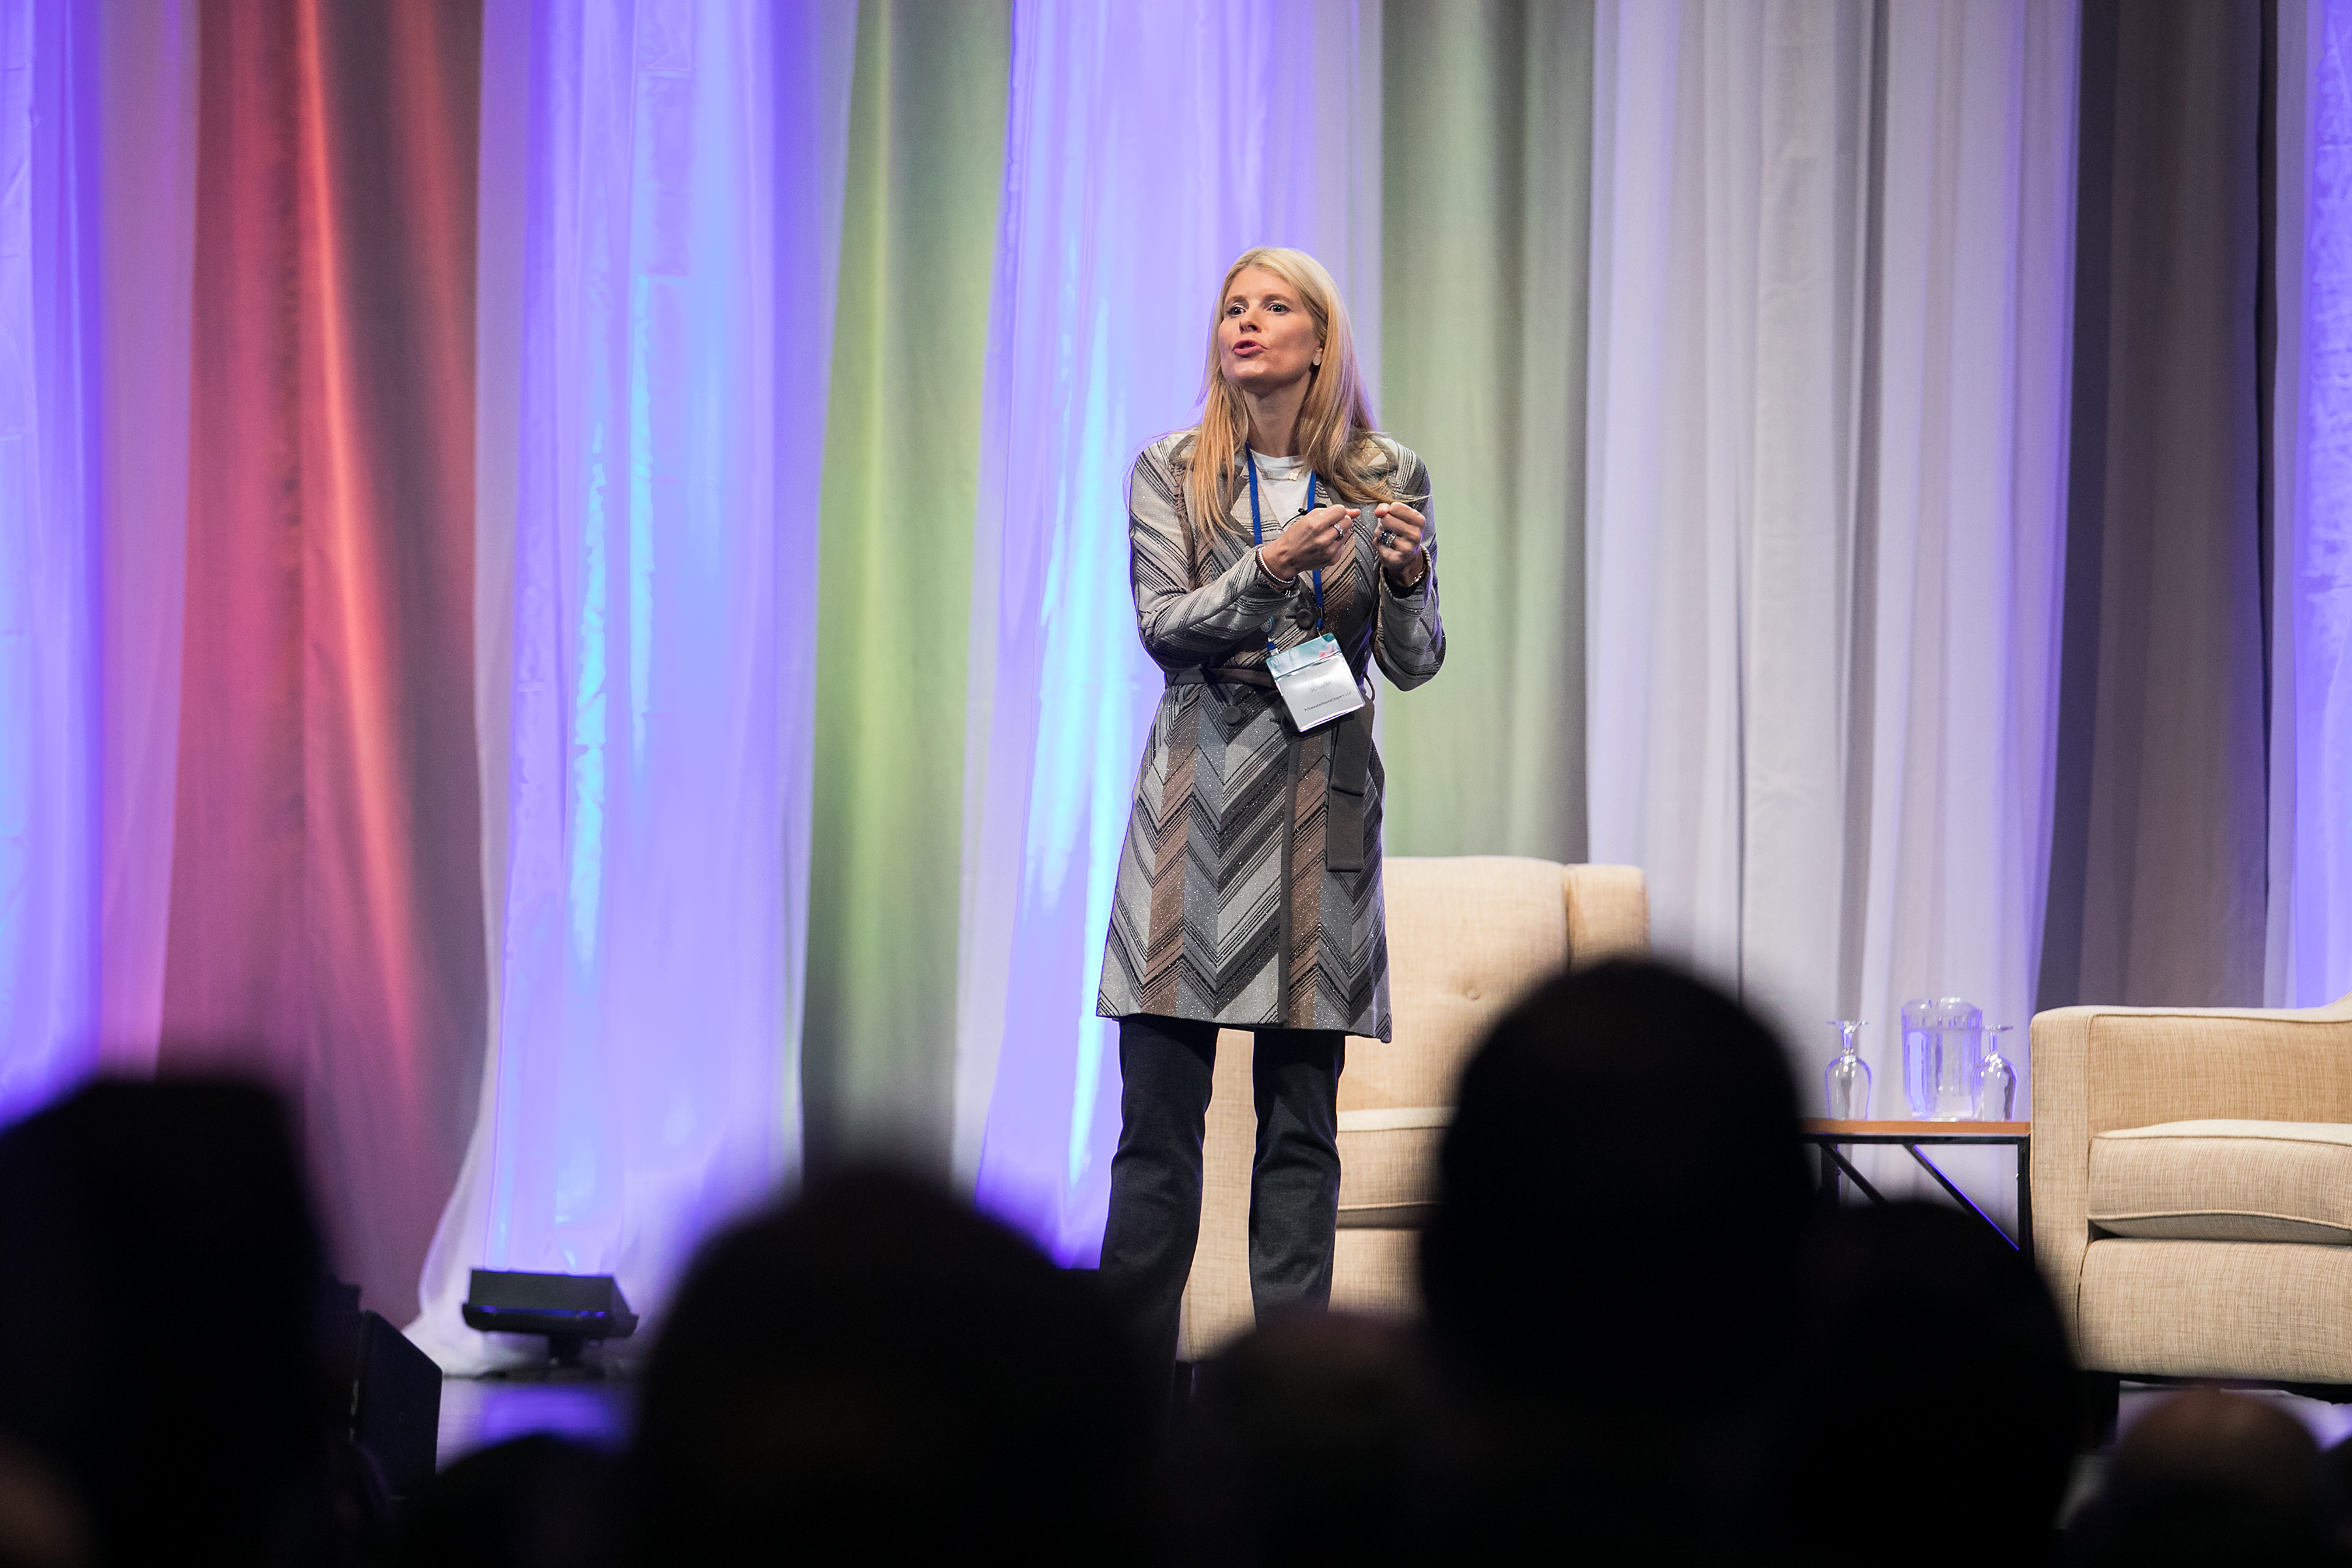 Shannon Schuyler, Chief Purpose Officer at PwC, speaking onstage at the 2017 Net Impact  Conference during her keynote session.